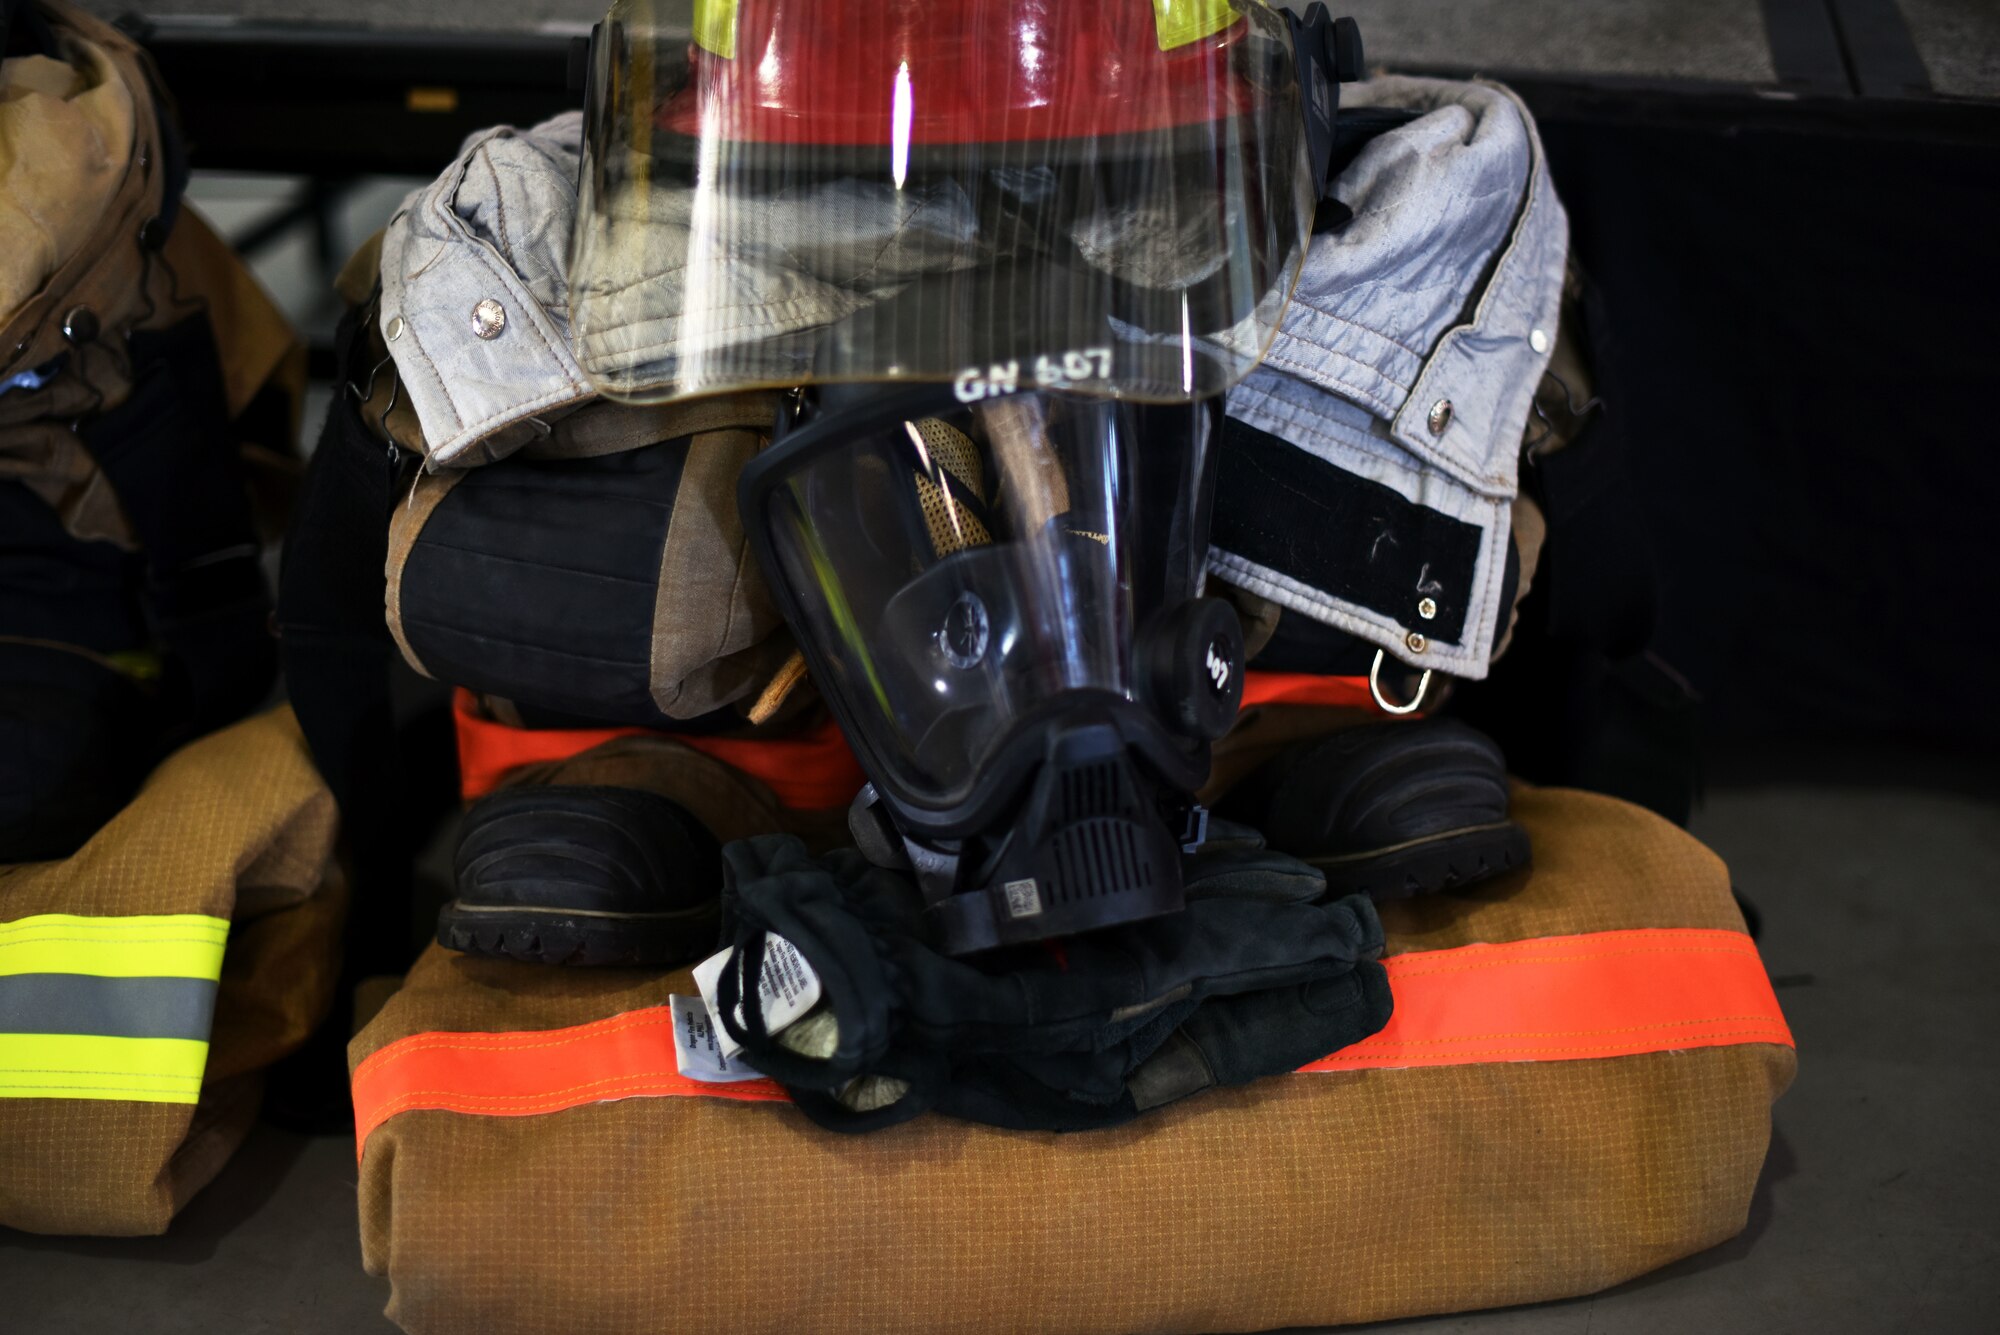 Firefighter equipment displayed at the Firefighter Remembrance Ceremony in the Department of Defense Louis F. Garland Fire Academy on Goodfellow Air Force Base, Texas, Sept. 11, 2019. The ceremony was held to honor those who paid the ultimate price during the fall of the twin towers, and also highlighted the 343 firefighters who gave their lives while helping others. (U.S. Air Force photo by Senior Airman Seraiah Wolf/Released)